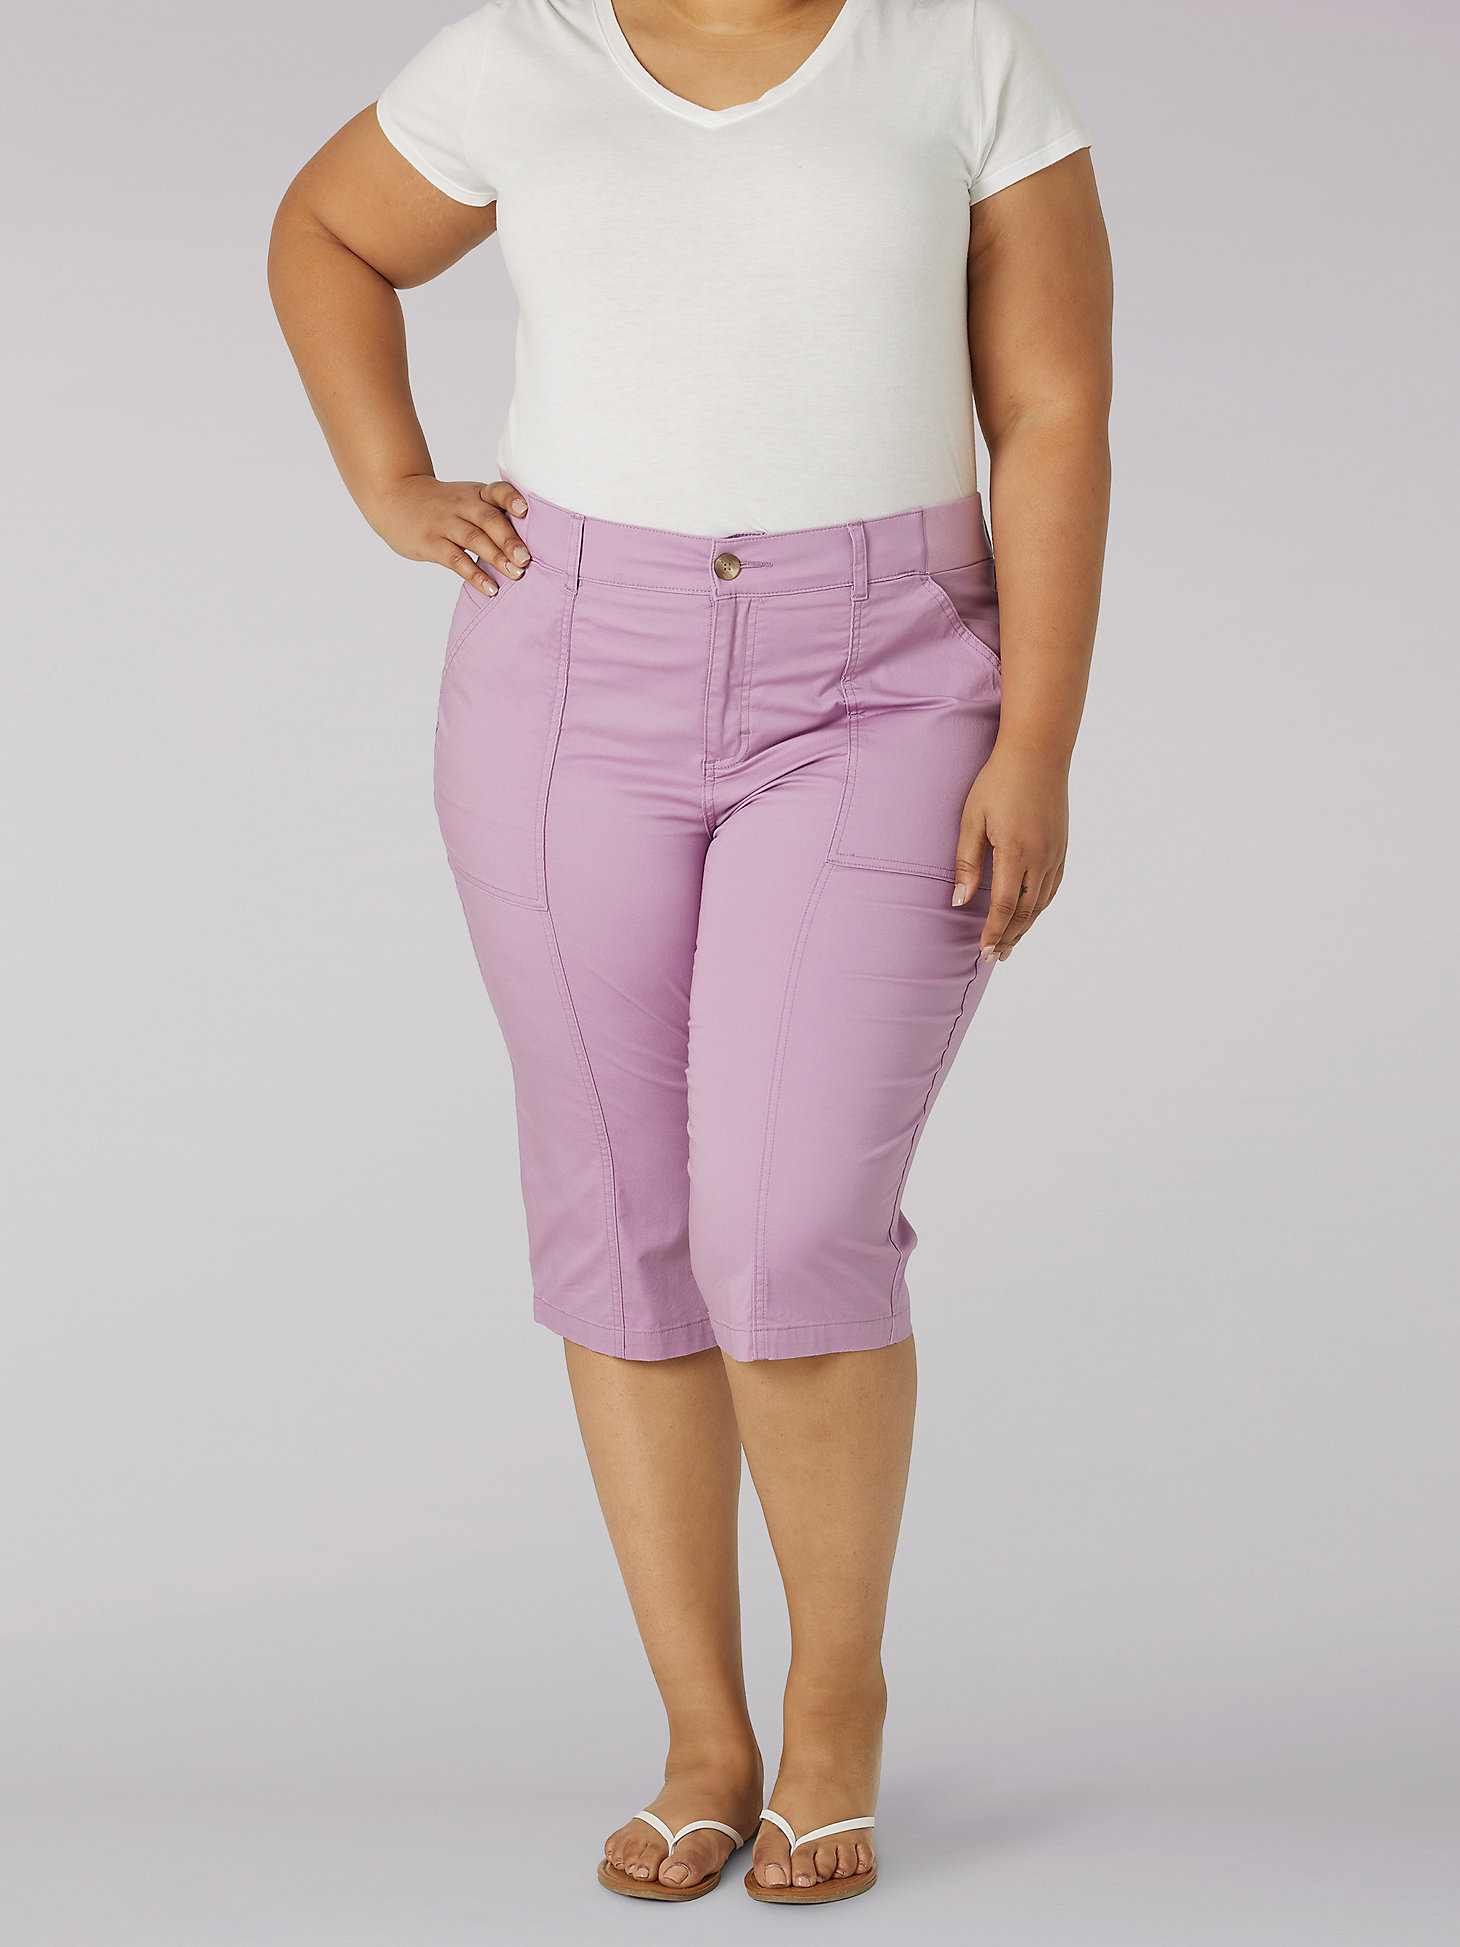 Women’s Flex-to-Go Relaxed Fit Cargo Skimmer (Plus) in Plum main view